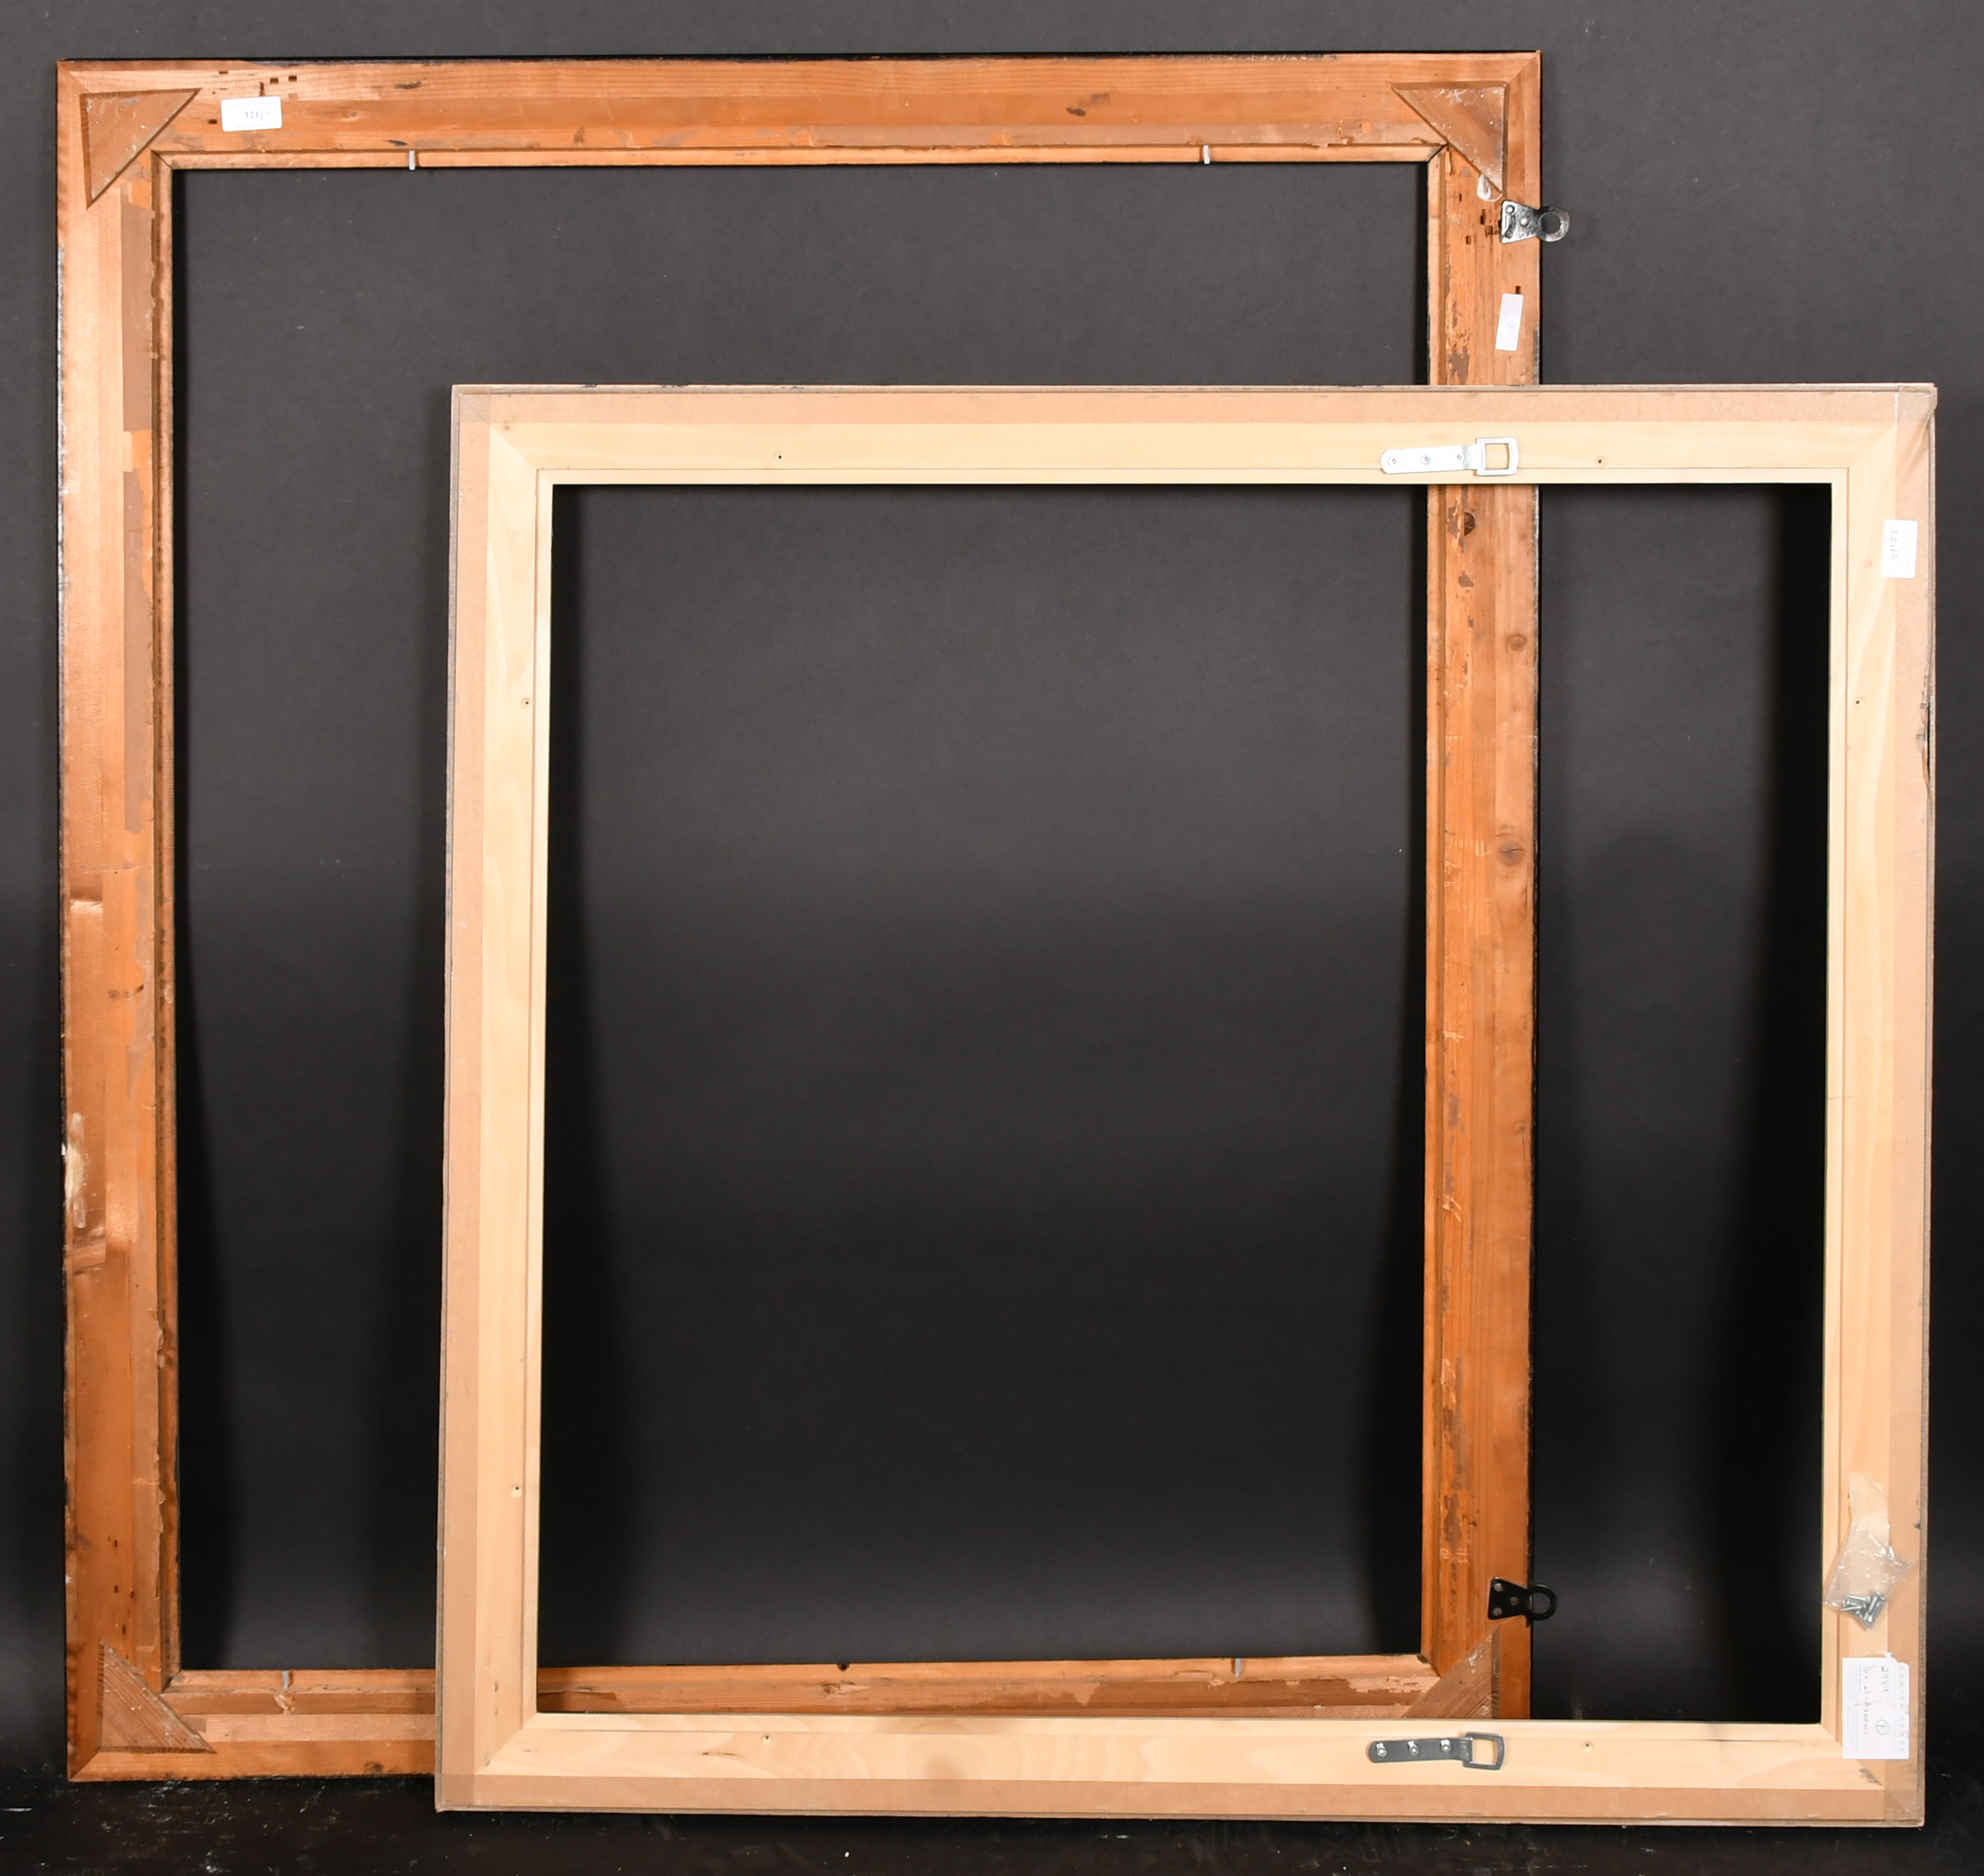 Early 20th Century European School. A Black Painted Frame, rebate 41.25" x 33.25" (104.8 x 84.4cm) - Image 3 of 3